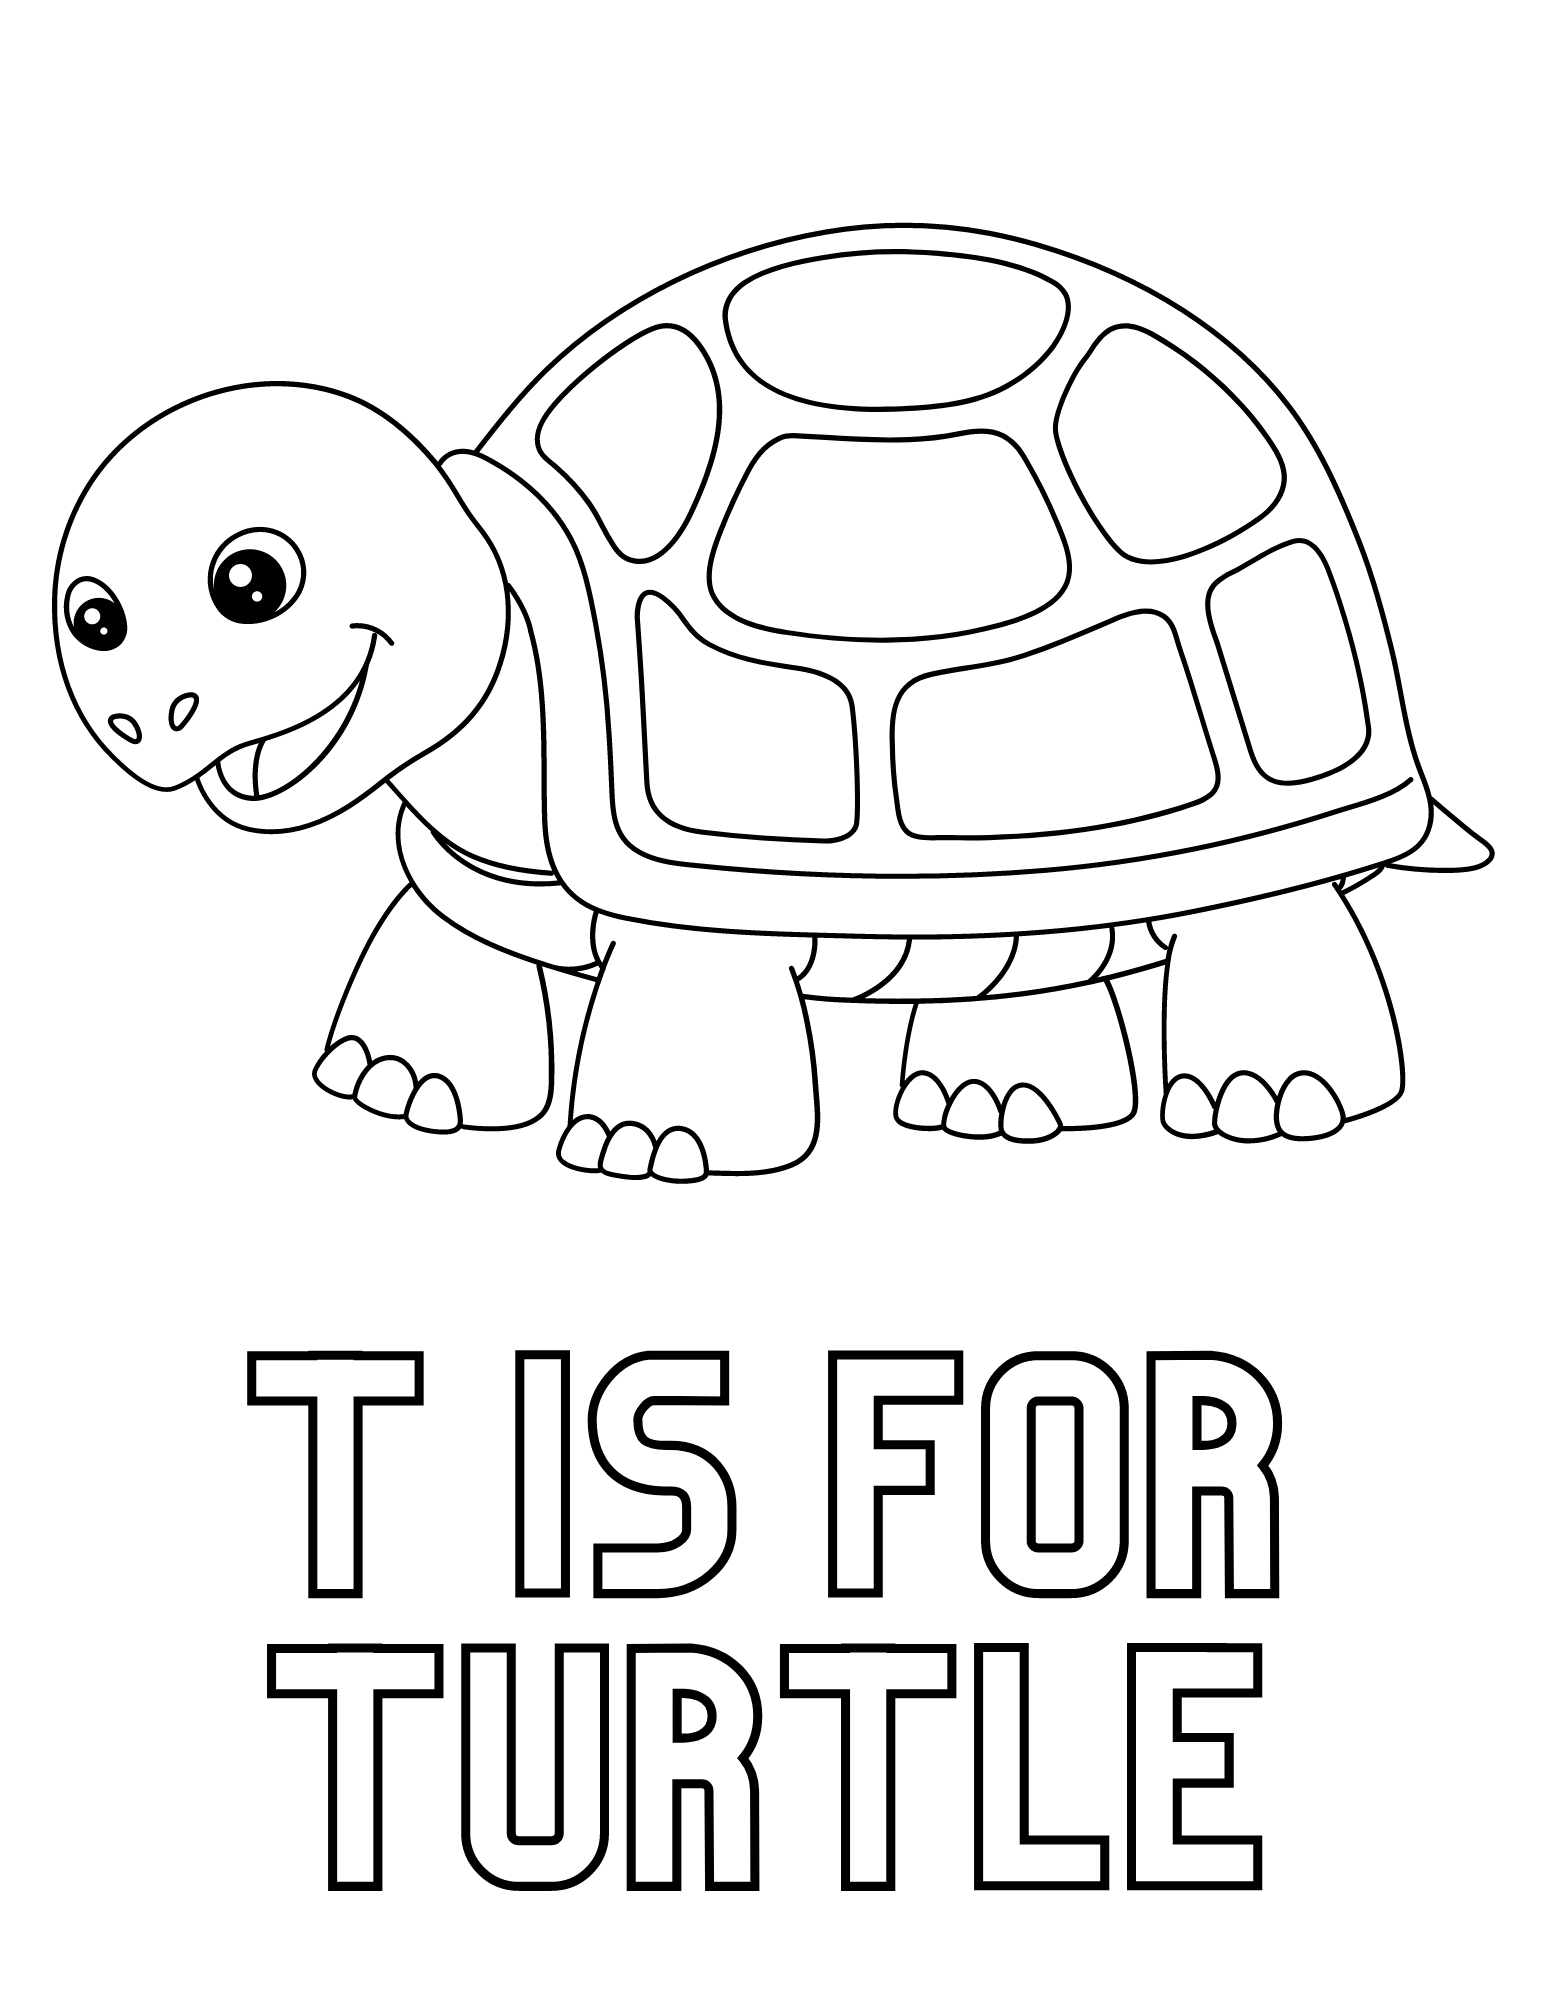 Cute turtle coloring pages and fun turtle facts for kids and adults